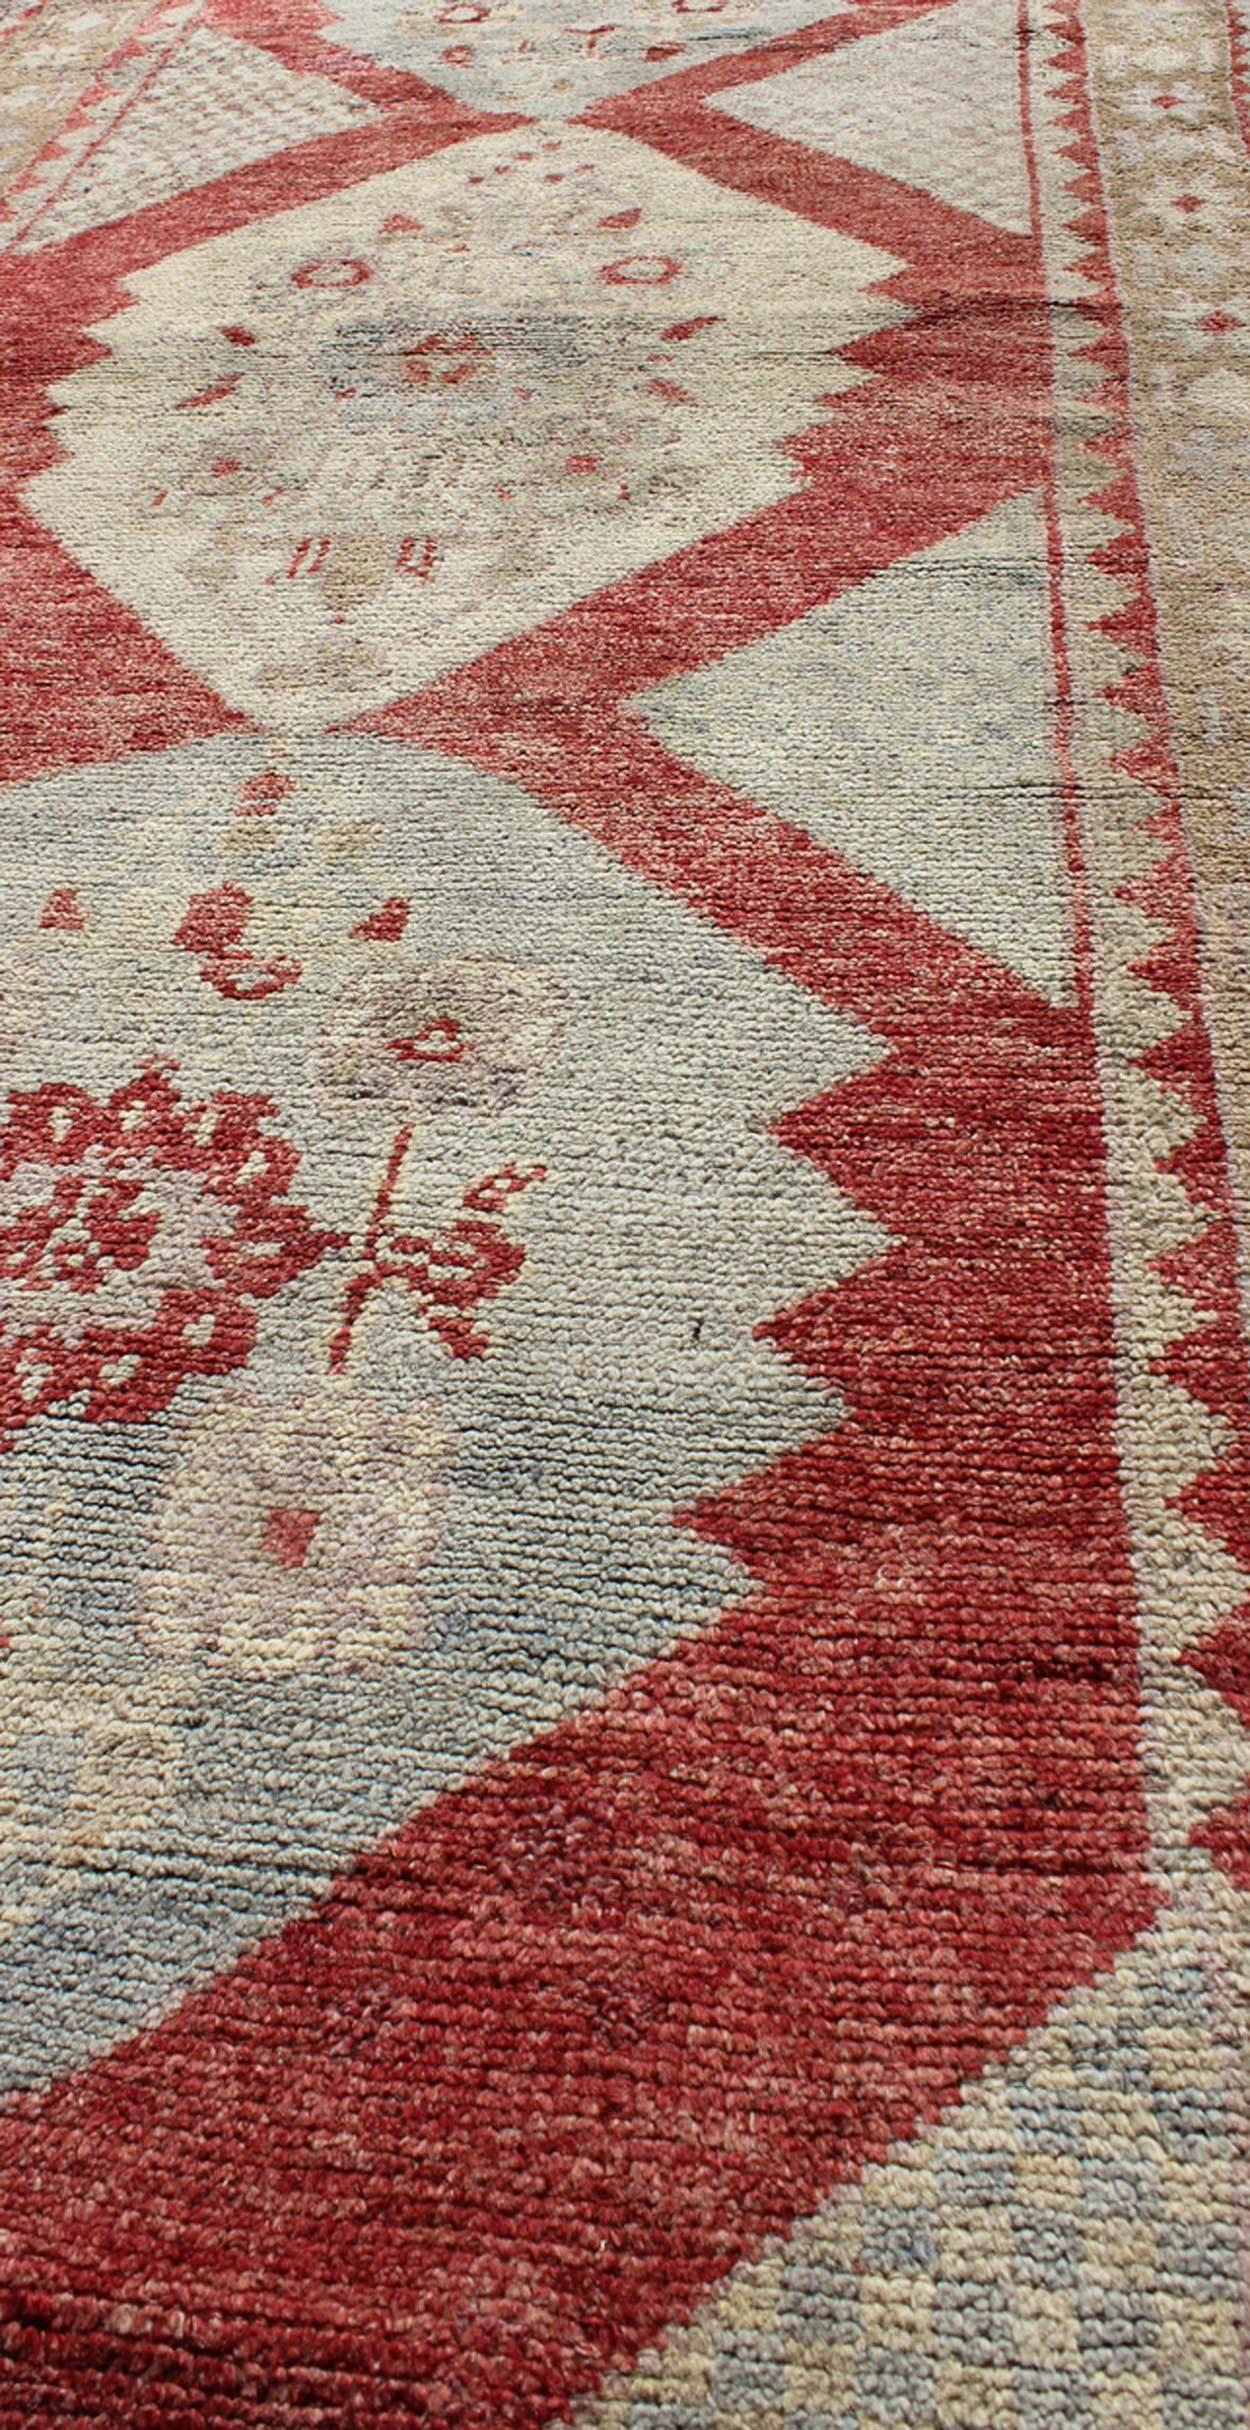 1930s Layered Medallion Vintage Turkish Oushak Runner in Red, Lt. Blue, Cream In Good Condition For Sale In Atlanta, GA